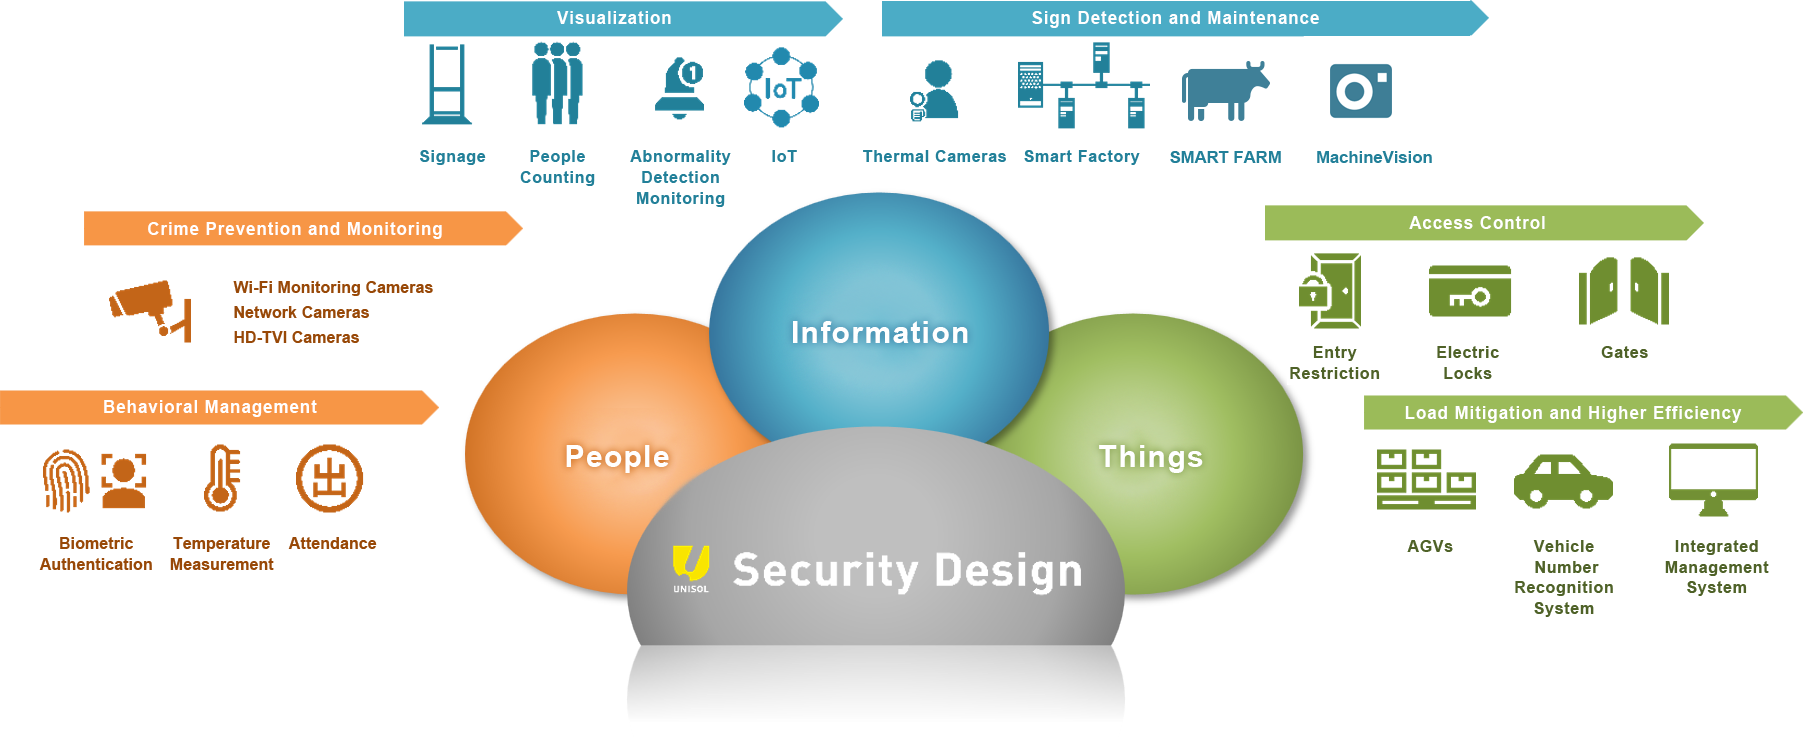 IoT Solutions Provided by Security Design